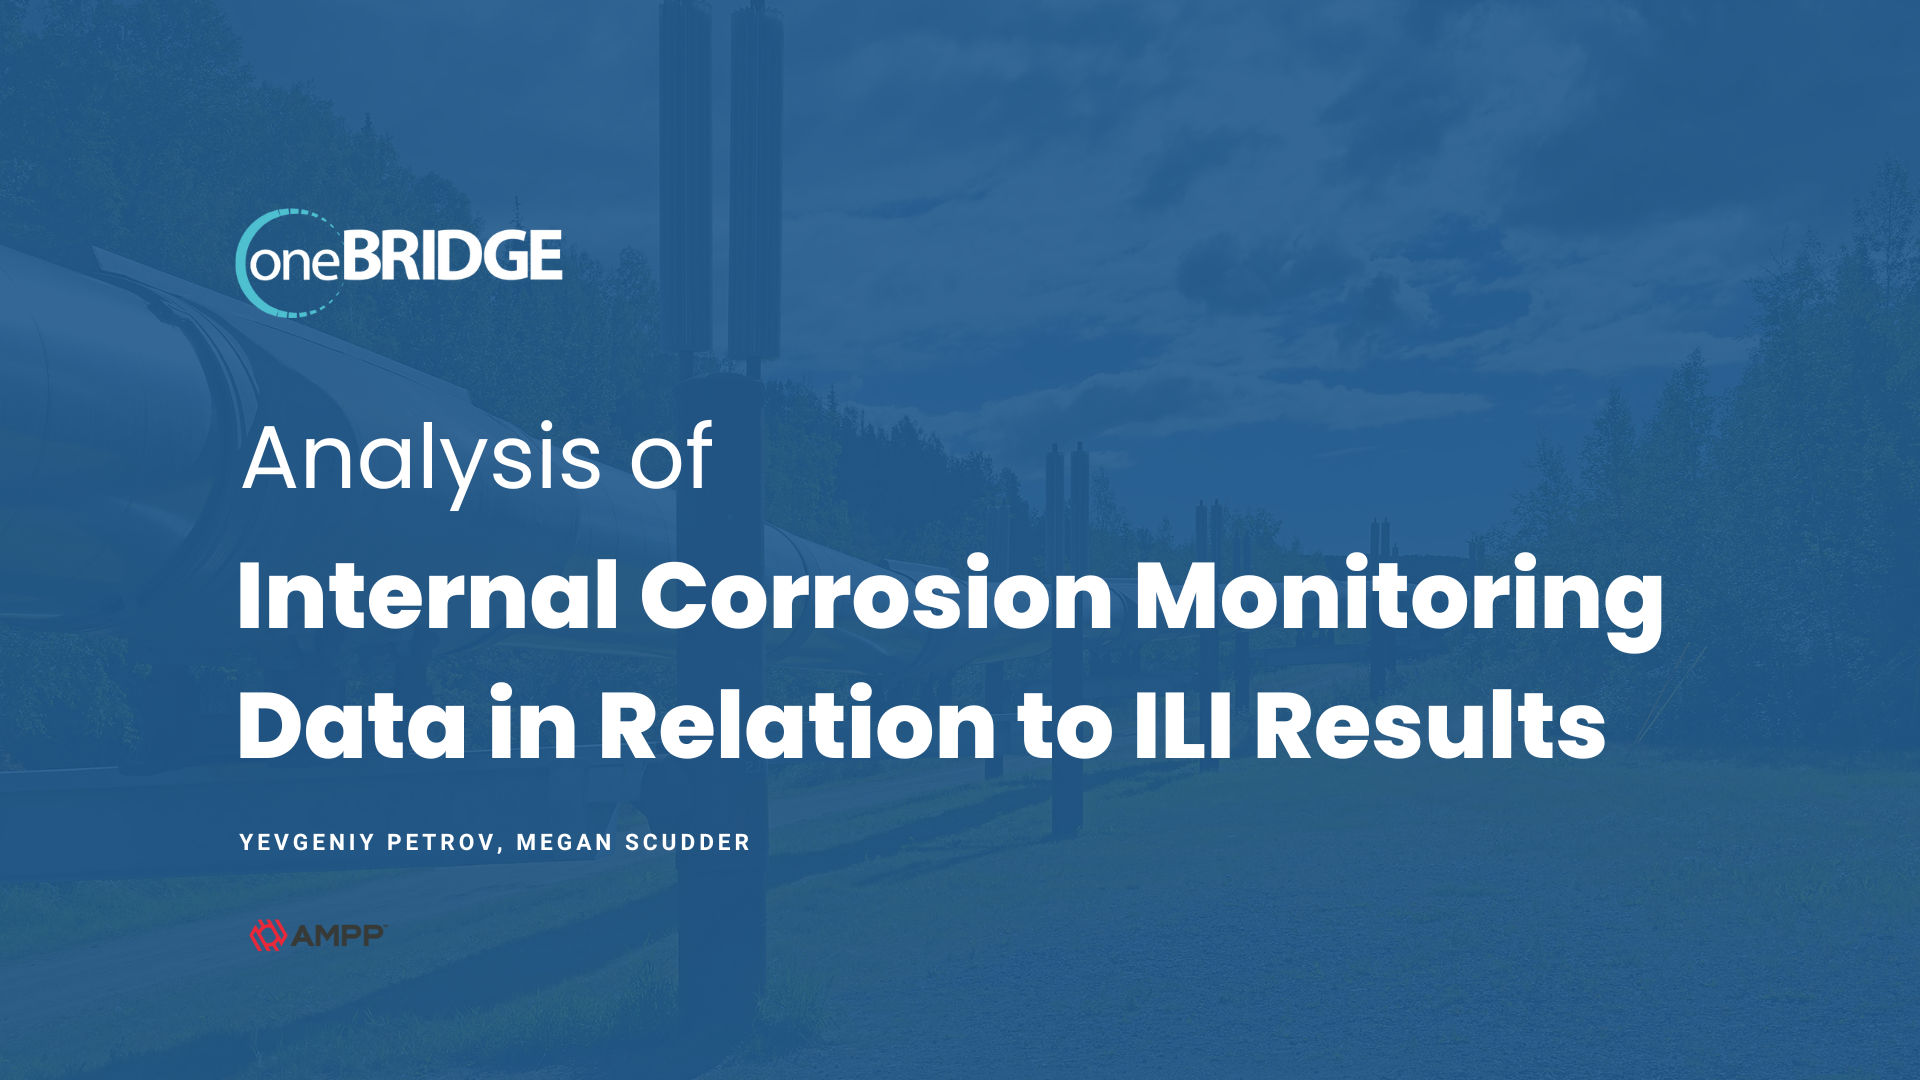 Analysis of Internal Corrosion Monitoring Data in Relation to ILI Results